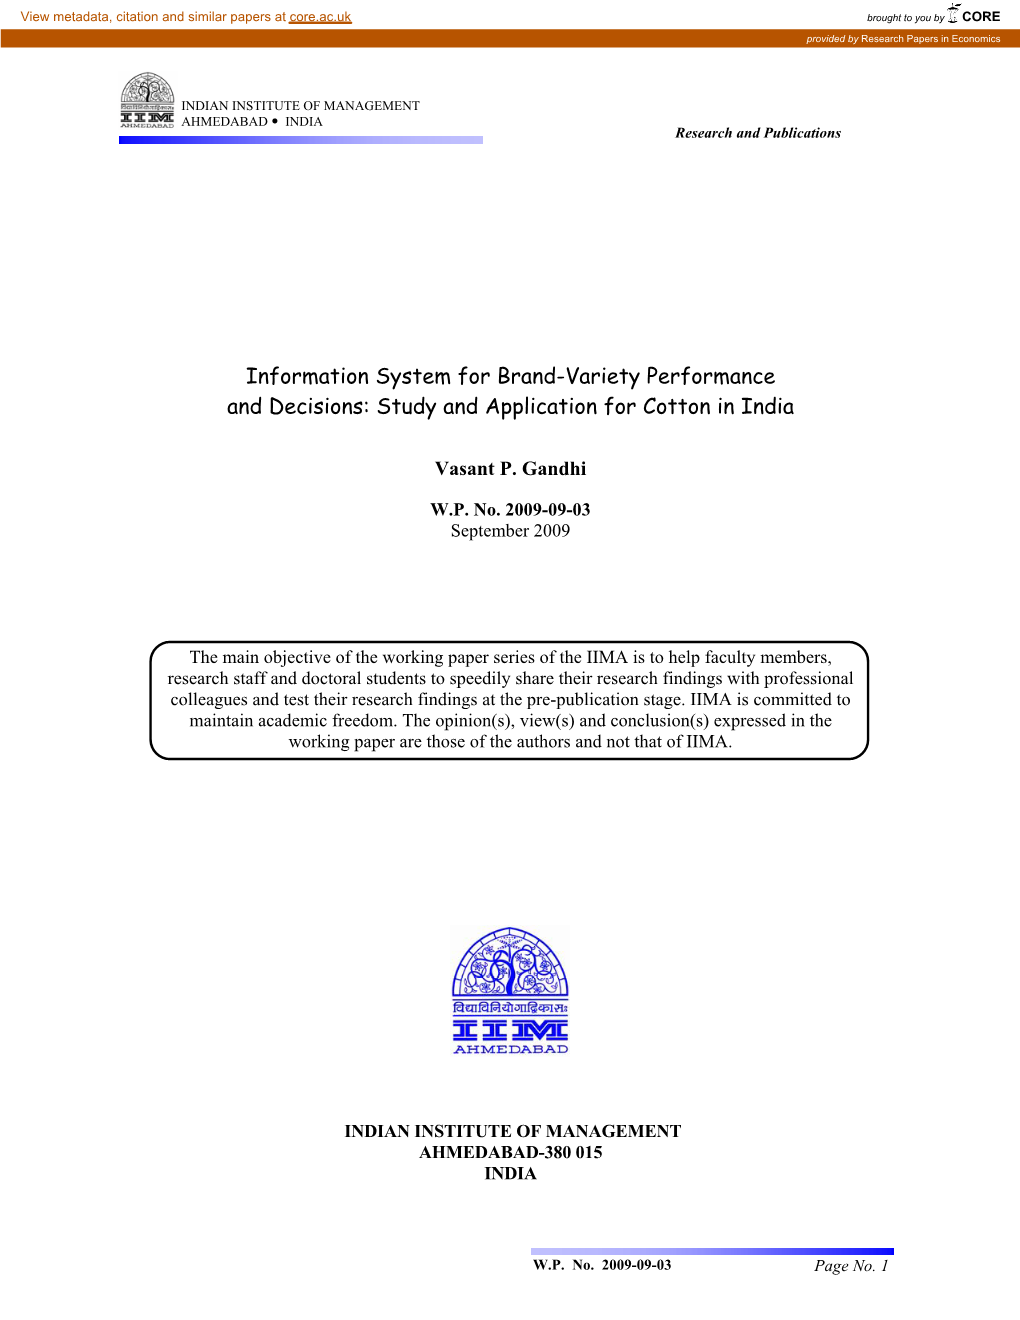 Information System for Brand-Variety Performance and Decisions: Study and Application for Cotton in India